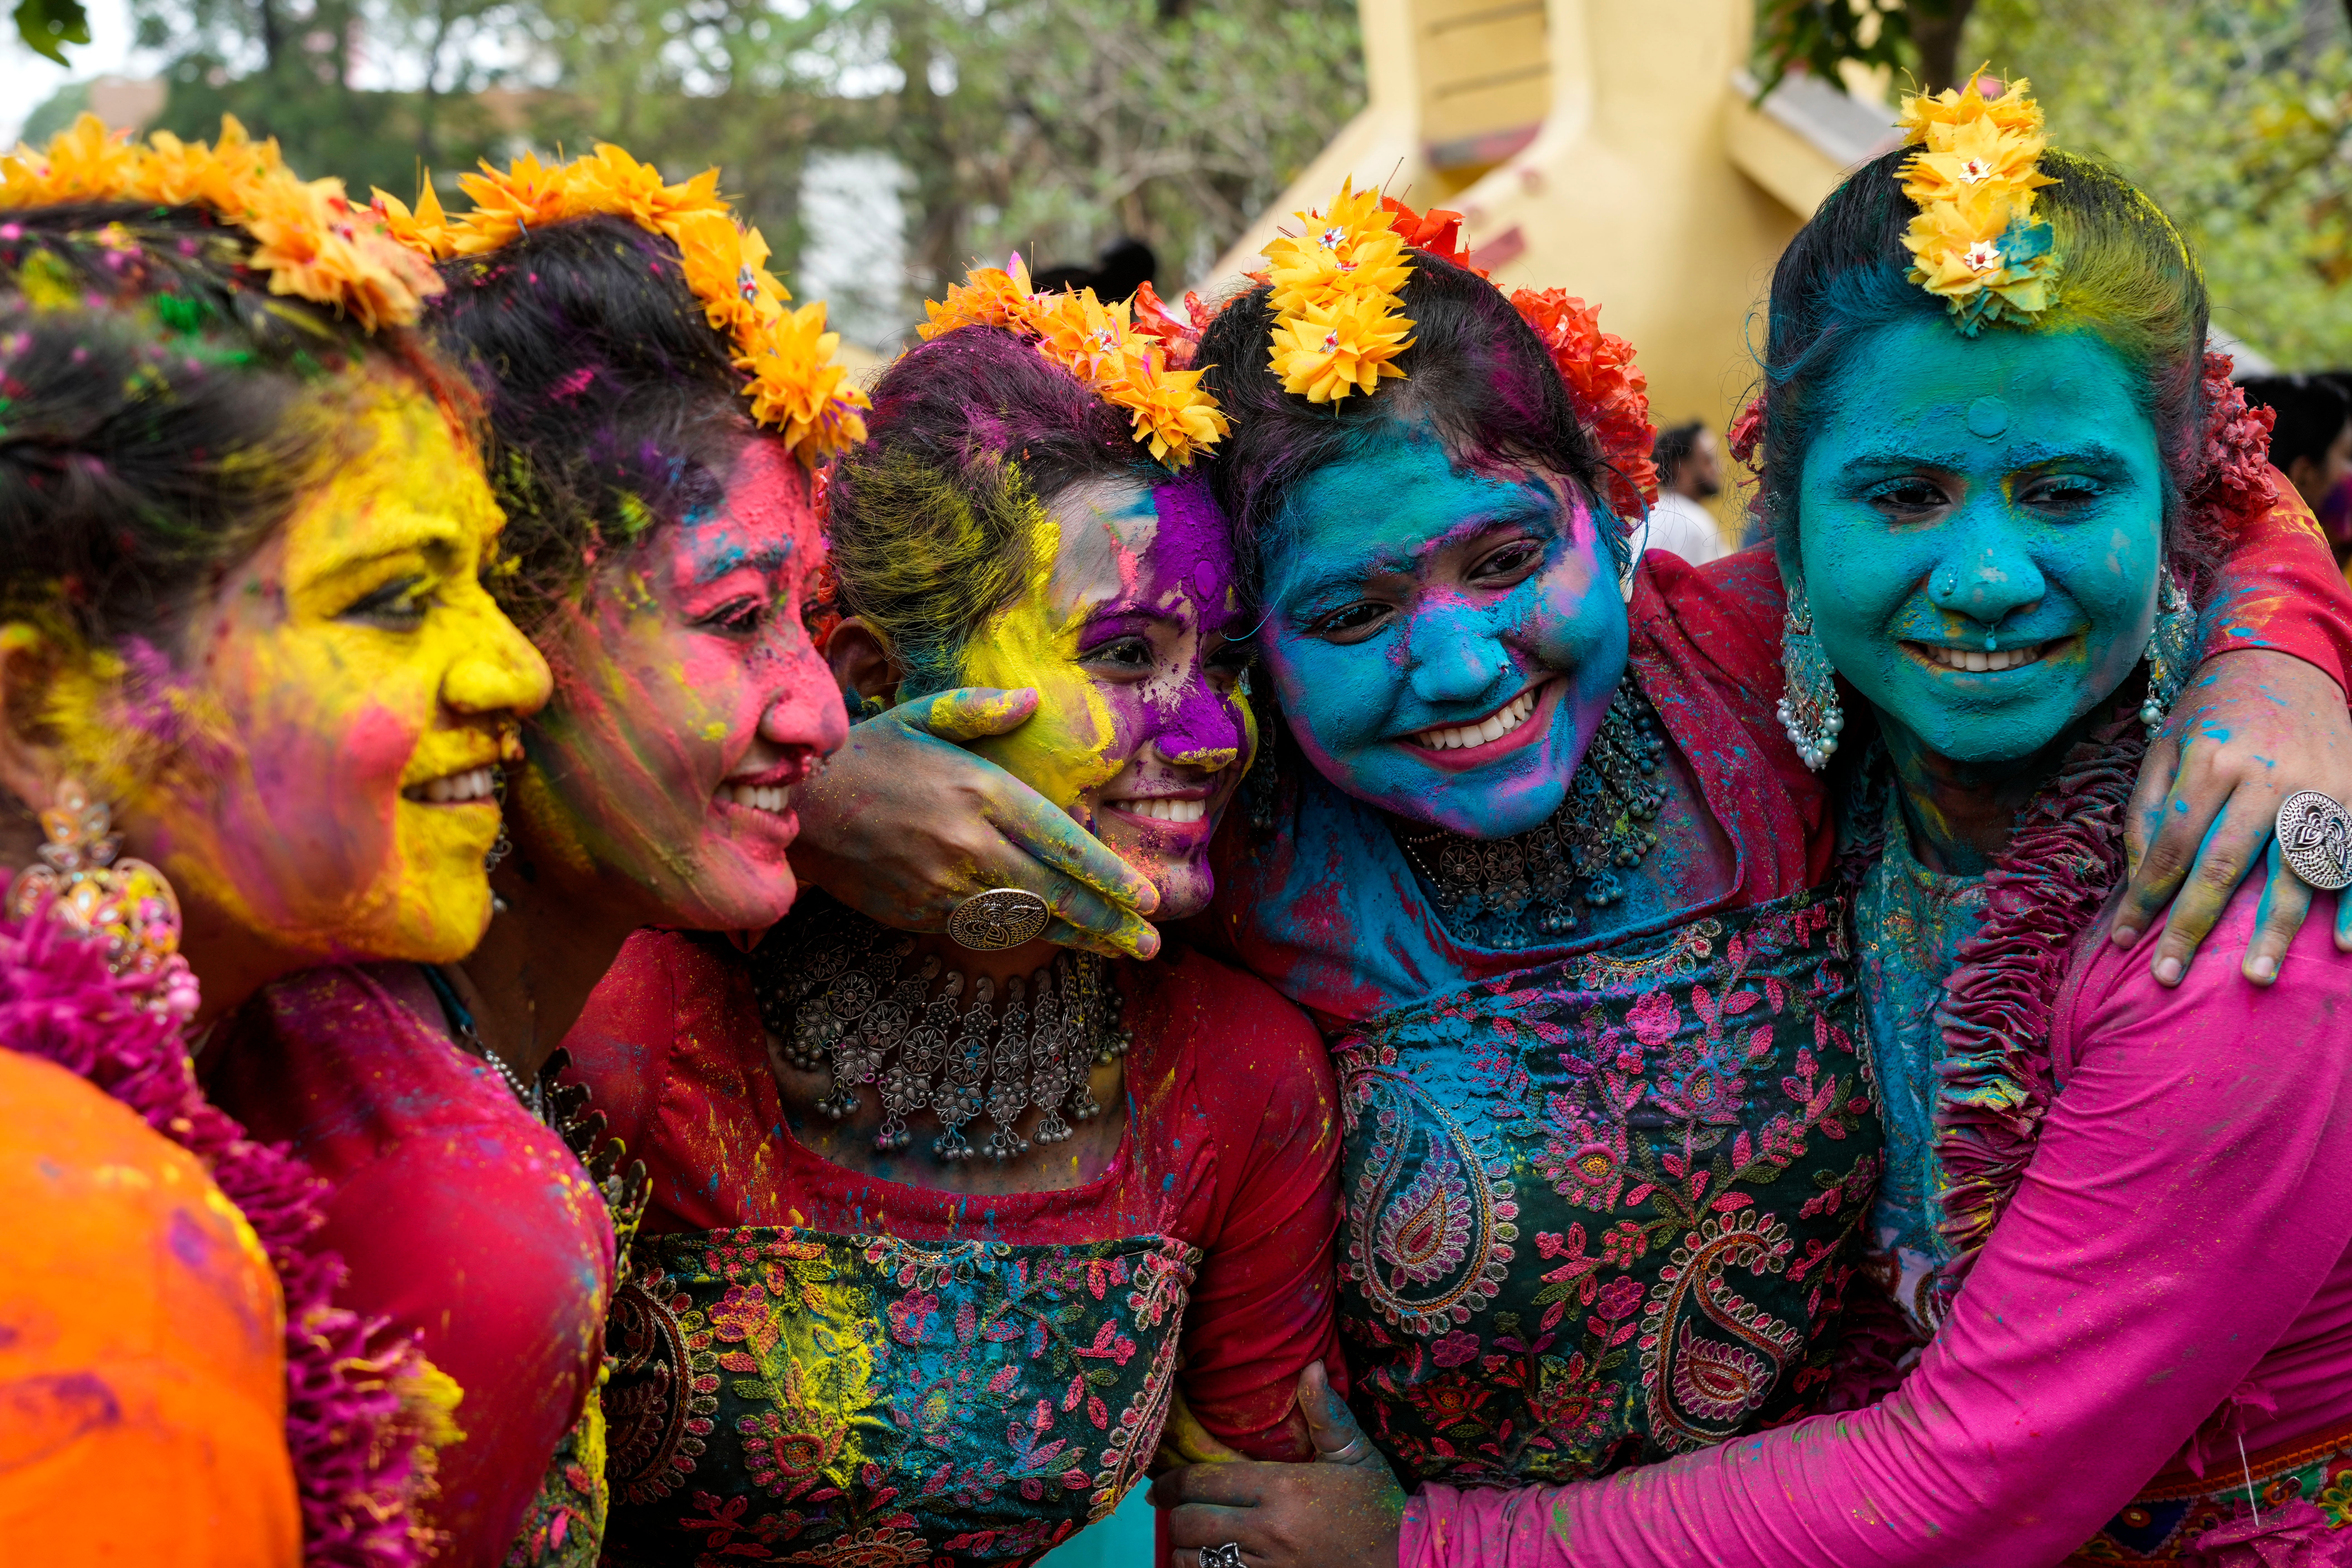 Women, with their faces smeared with coloured powder, pose for a photograph as they celebrate Holi, the festival of colors, in Kolkata, India